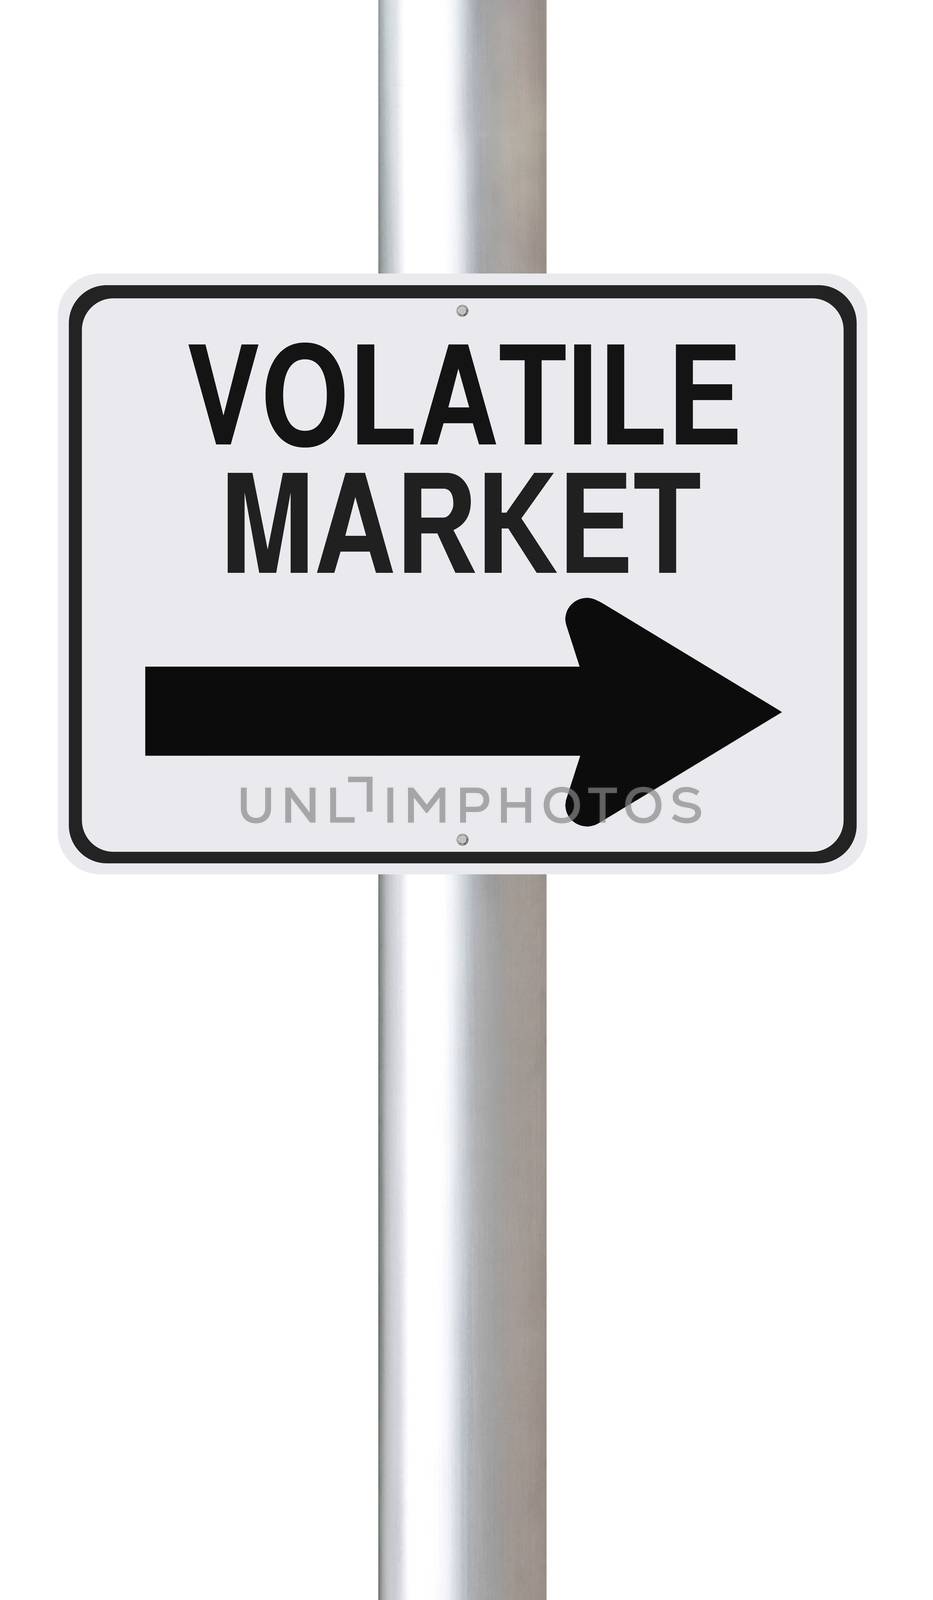 A conceptual one way sign on market volatility